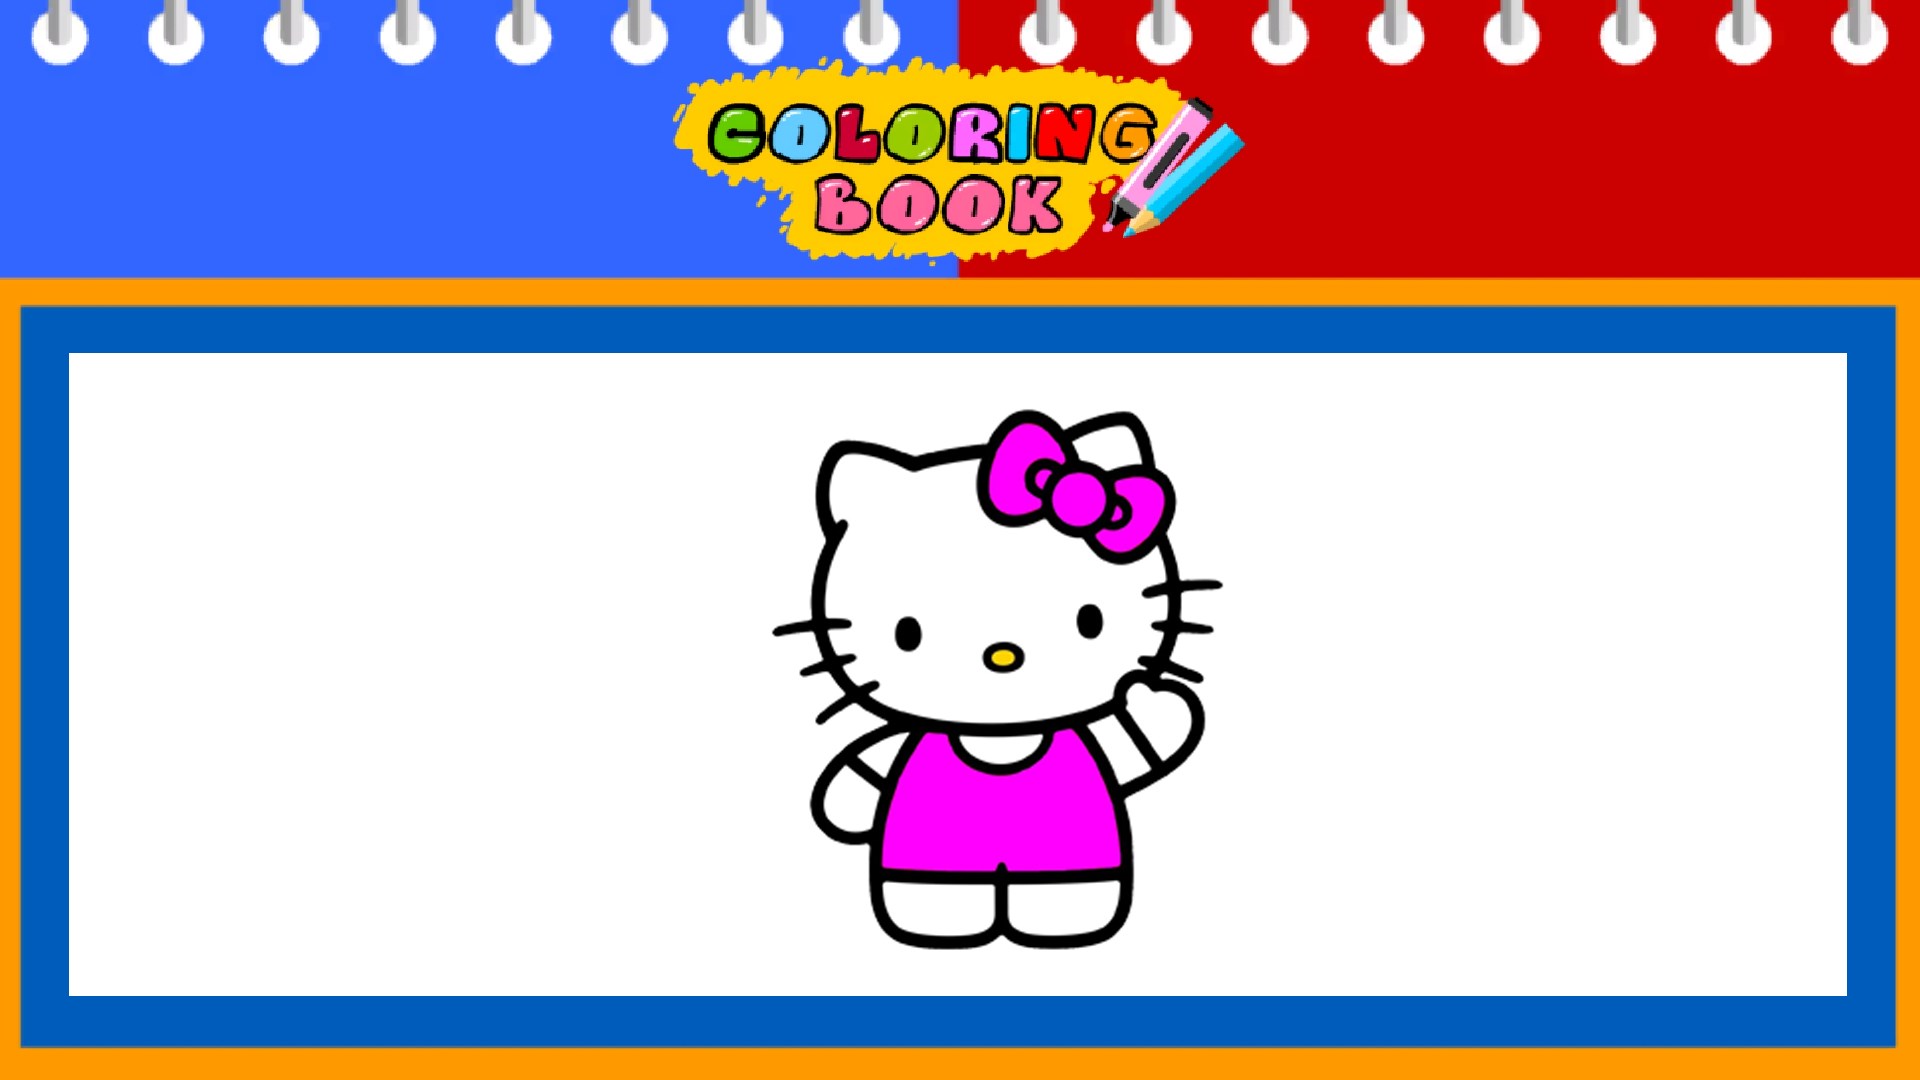 Cat Coloring Pages for Adults - Microsoft Apps